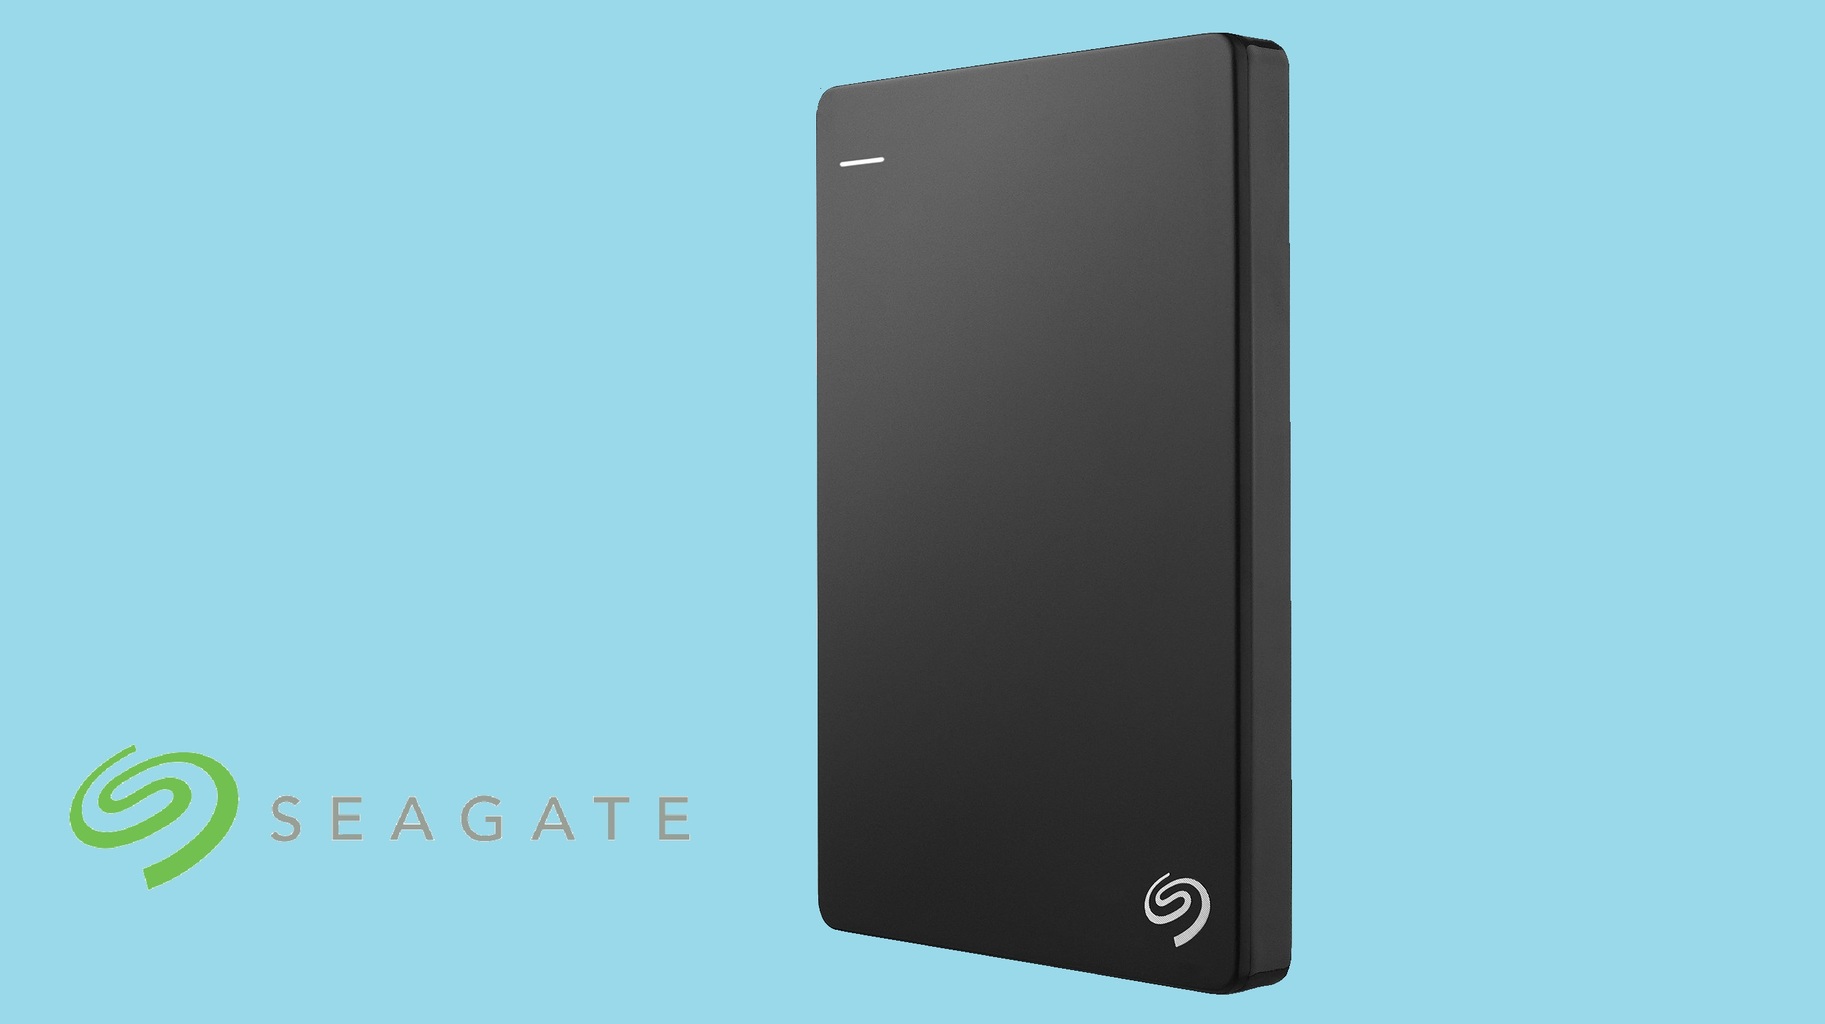 Seagate Backup Plus Slim portable external hard drive review and specs